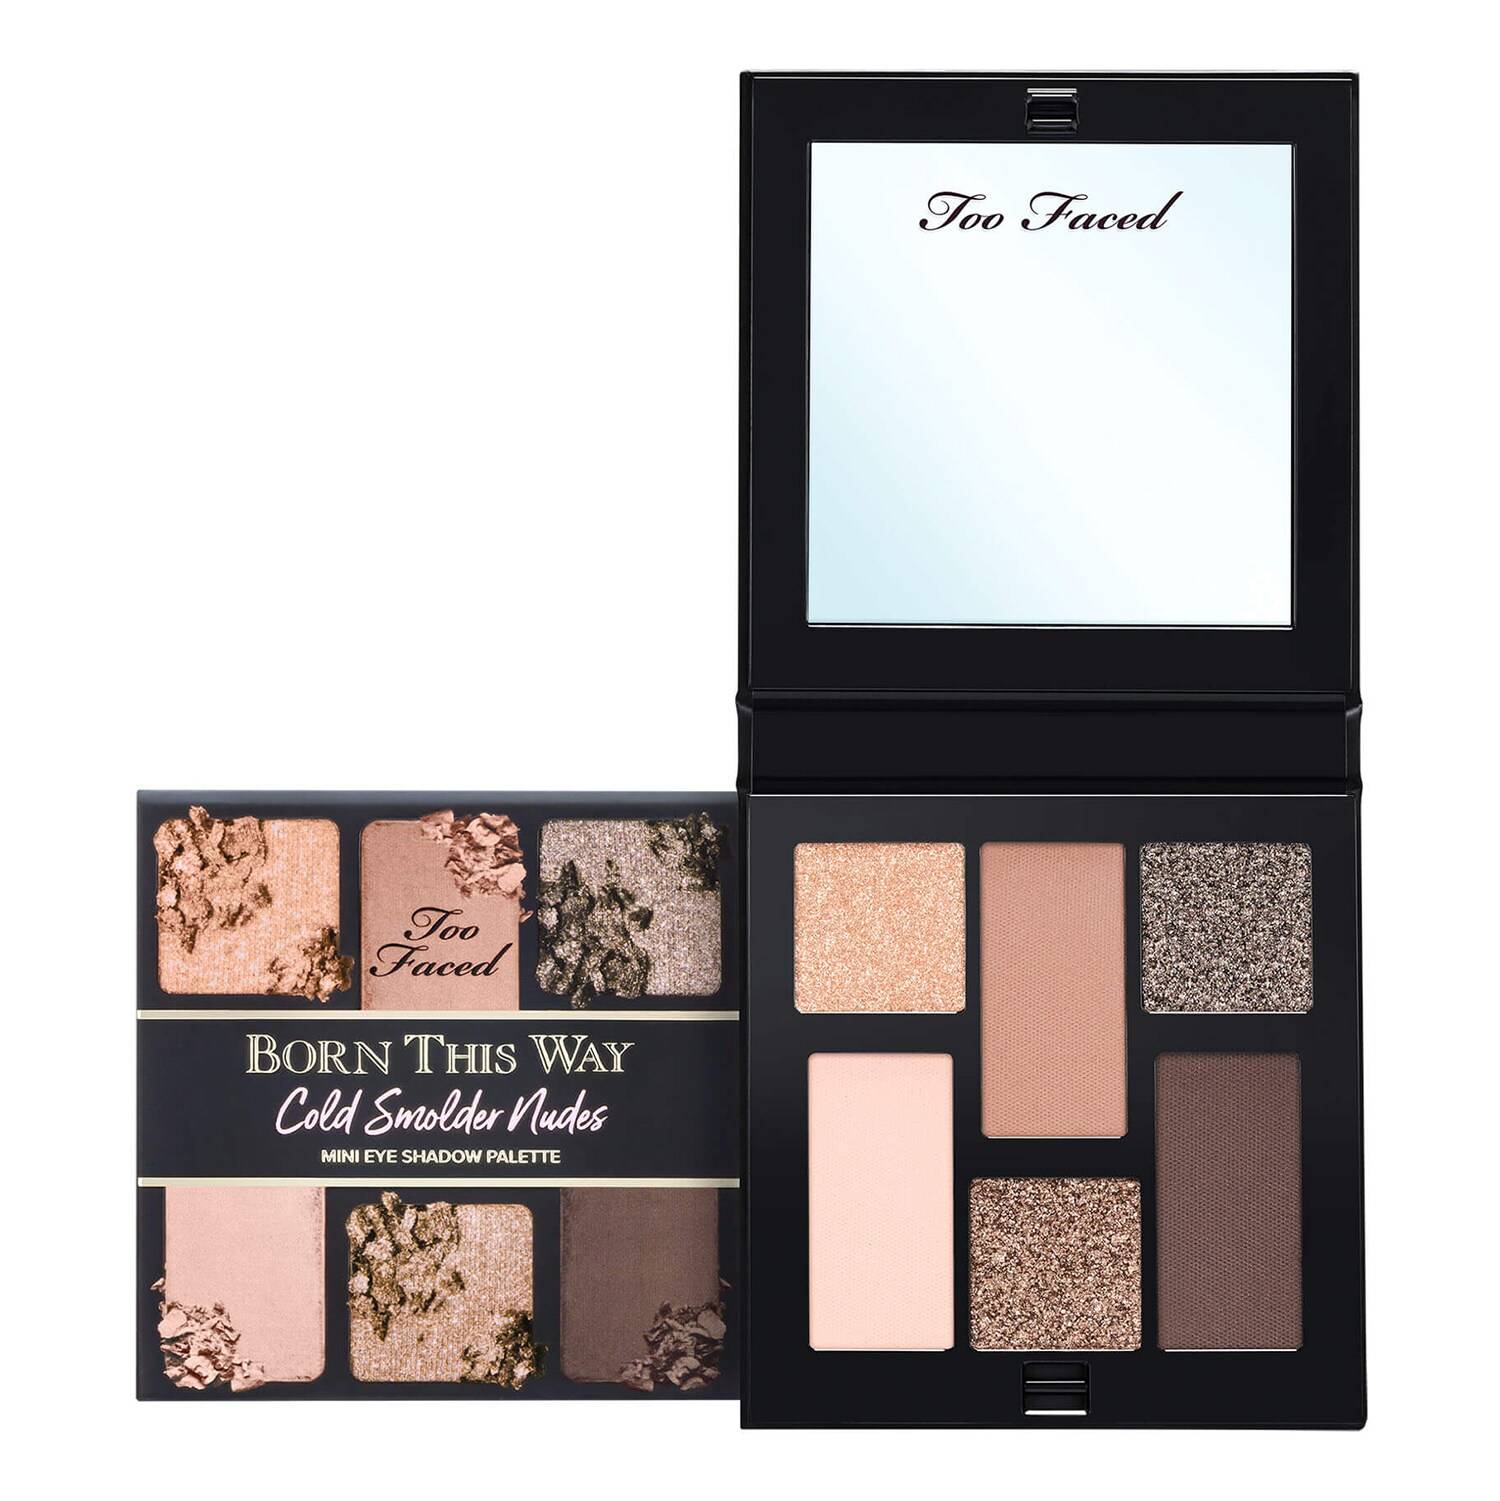 Too Faced Born This Way Cold Smolder Nudes - Eyeshadow Palette 6 X 4G